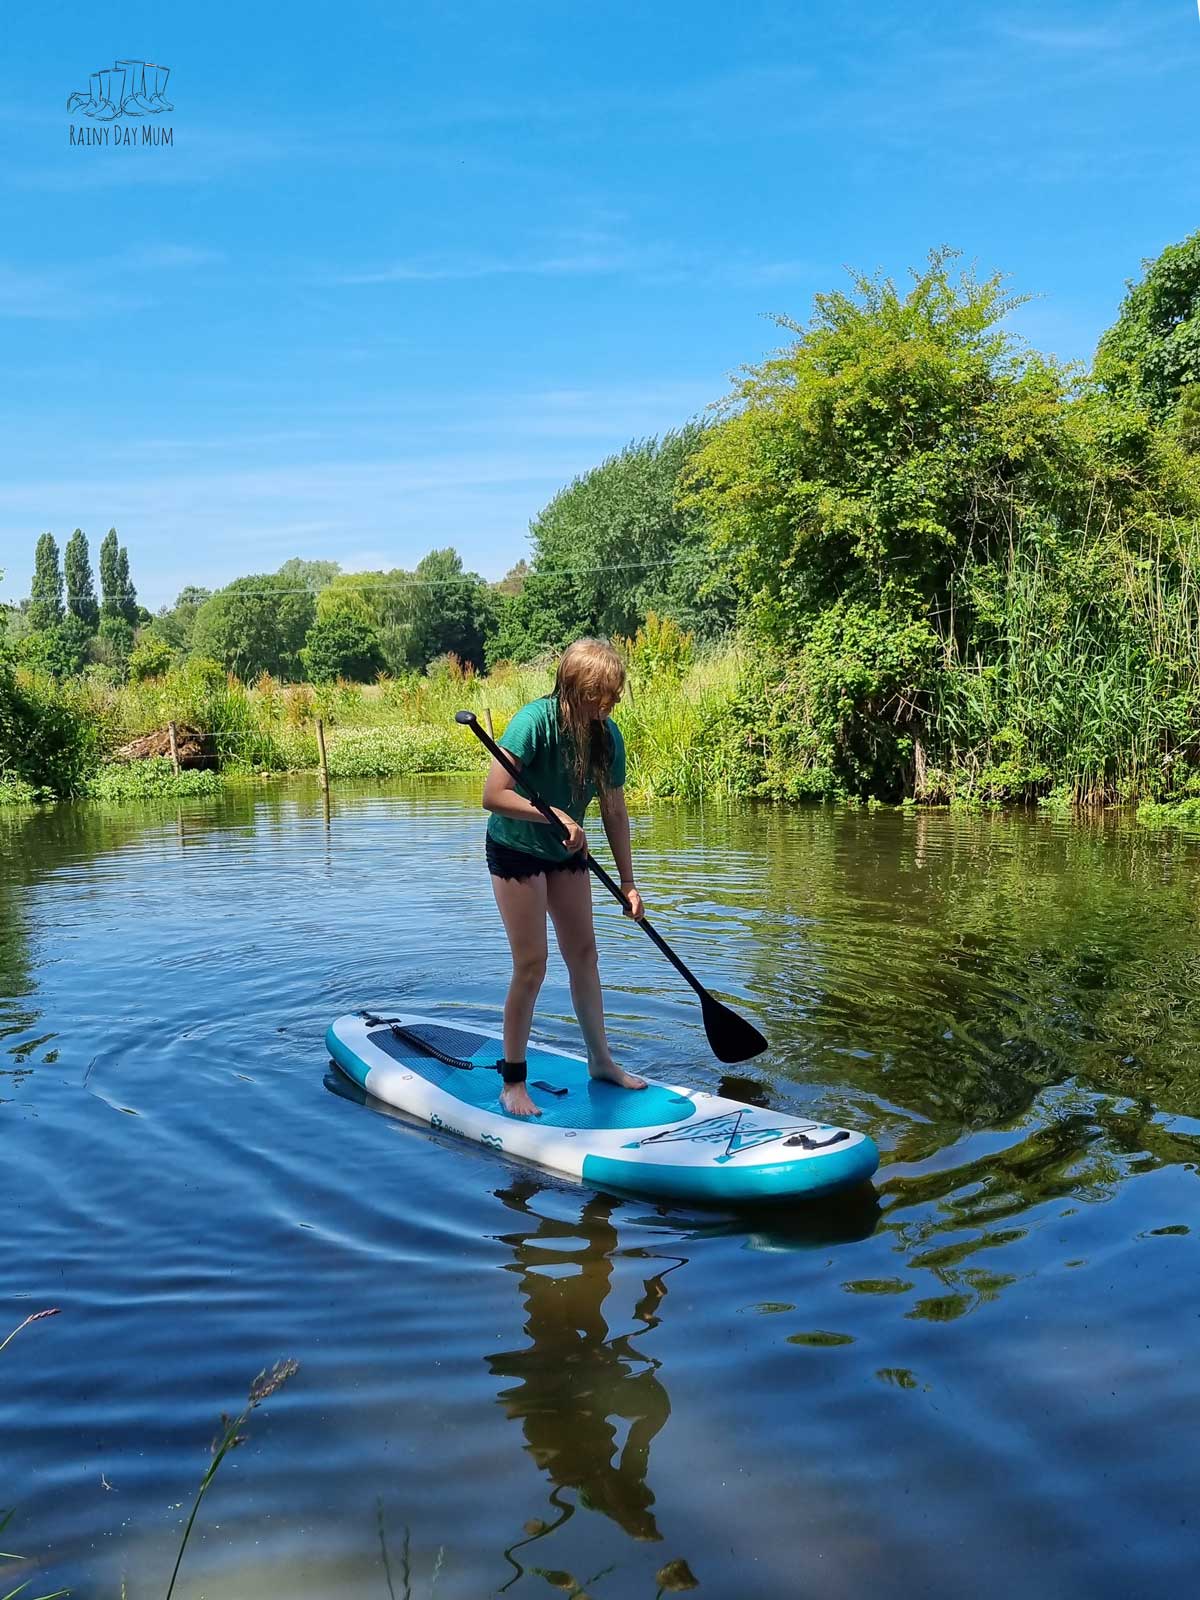 Girl on an EZ Kids Paddleboard in the Summer on a river